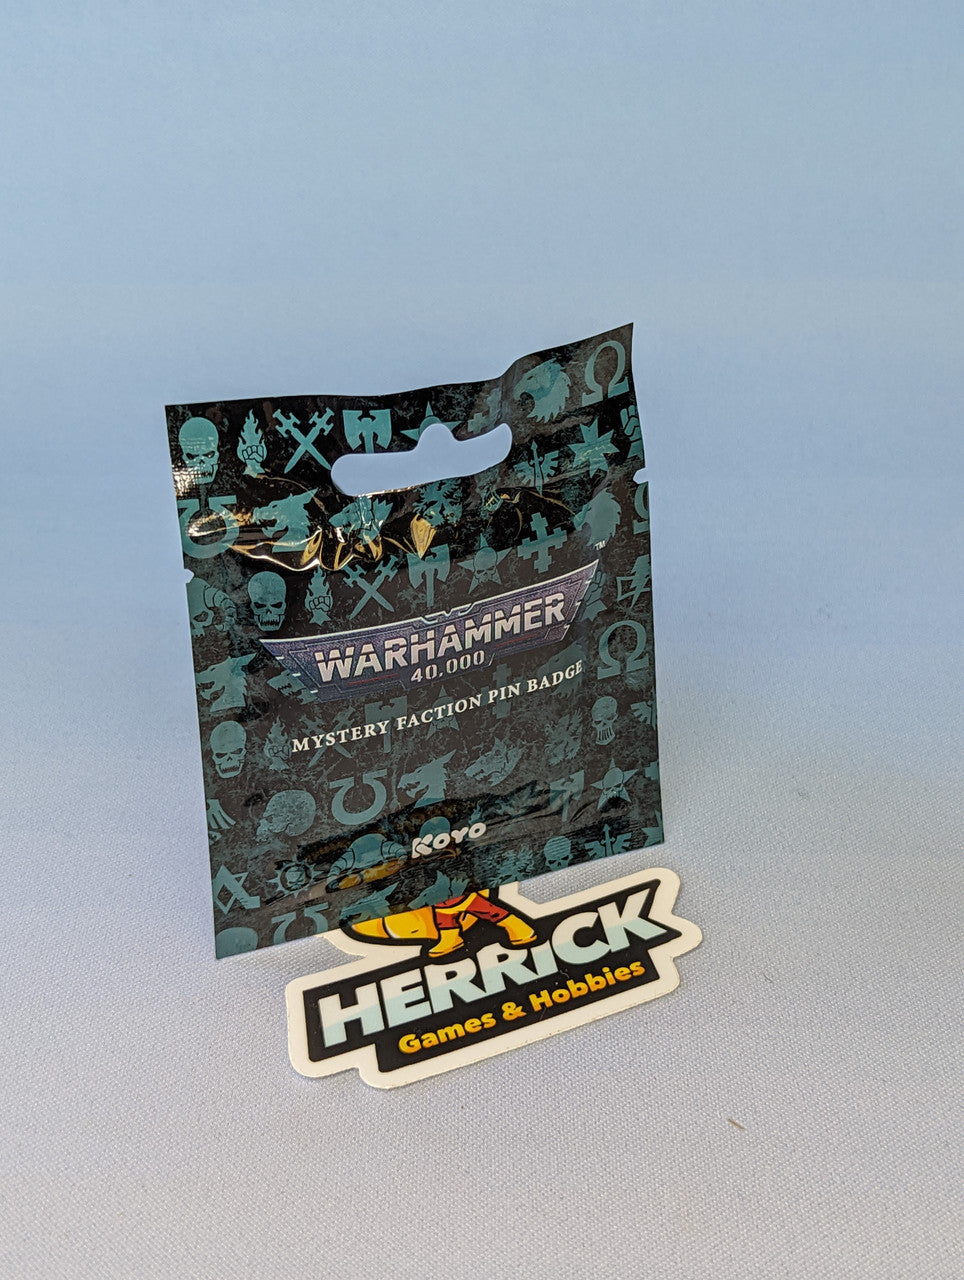 Warhammer Mystery Faction Pins - Collection of 10 Mystery Pins Sold Individually In A Blind Bag With 1 Gold Chasers To Find